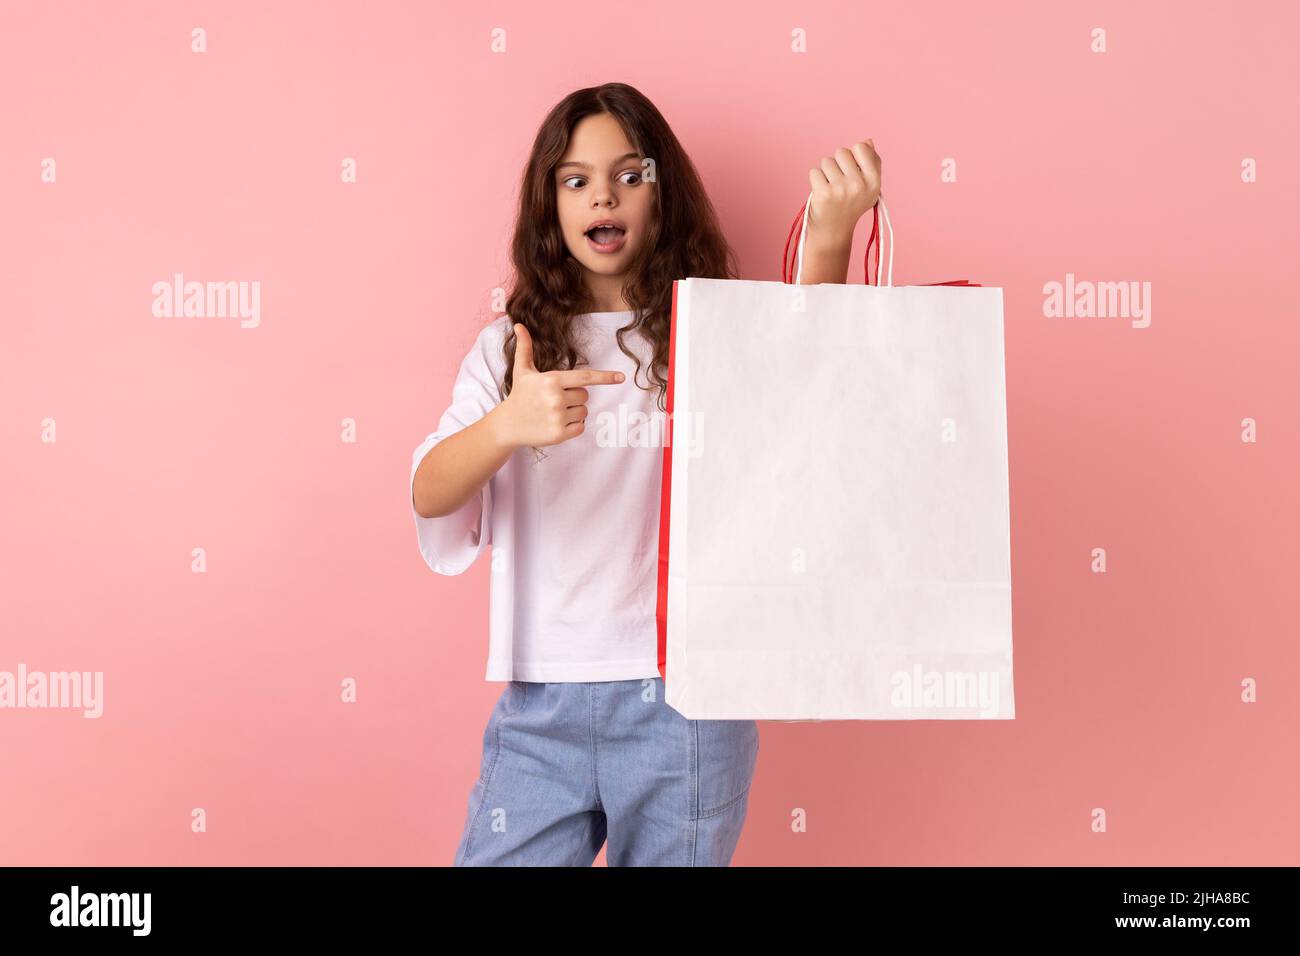 Portrait of shocked little girl wearing white T-shirt pointing at shopping bags, looking at camera with astonished facial expression. Indoor studio shot isolated on pink background. Stock Photo